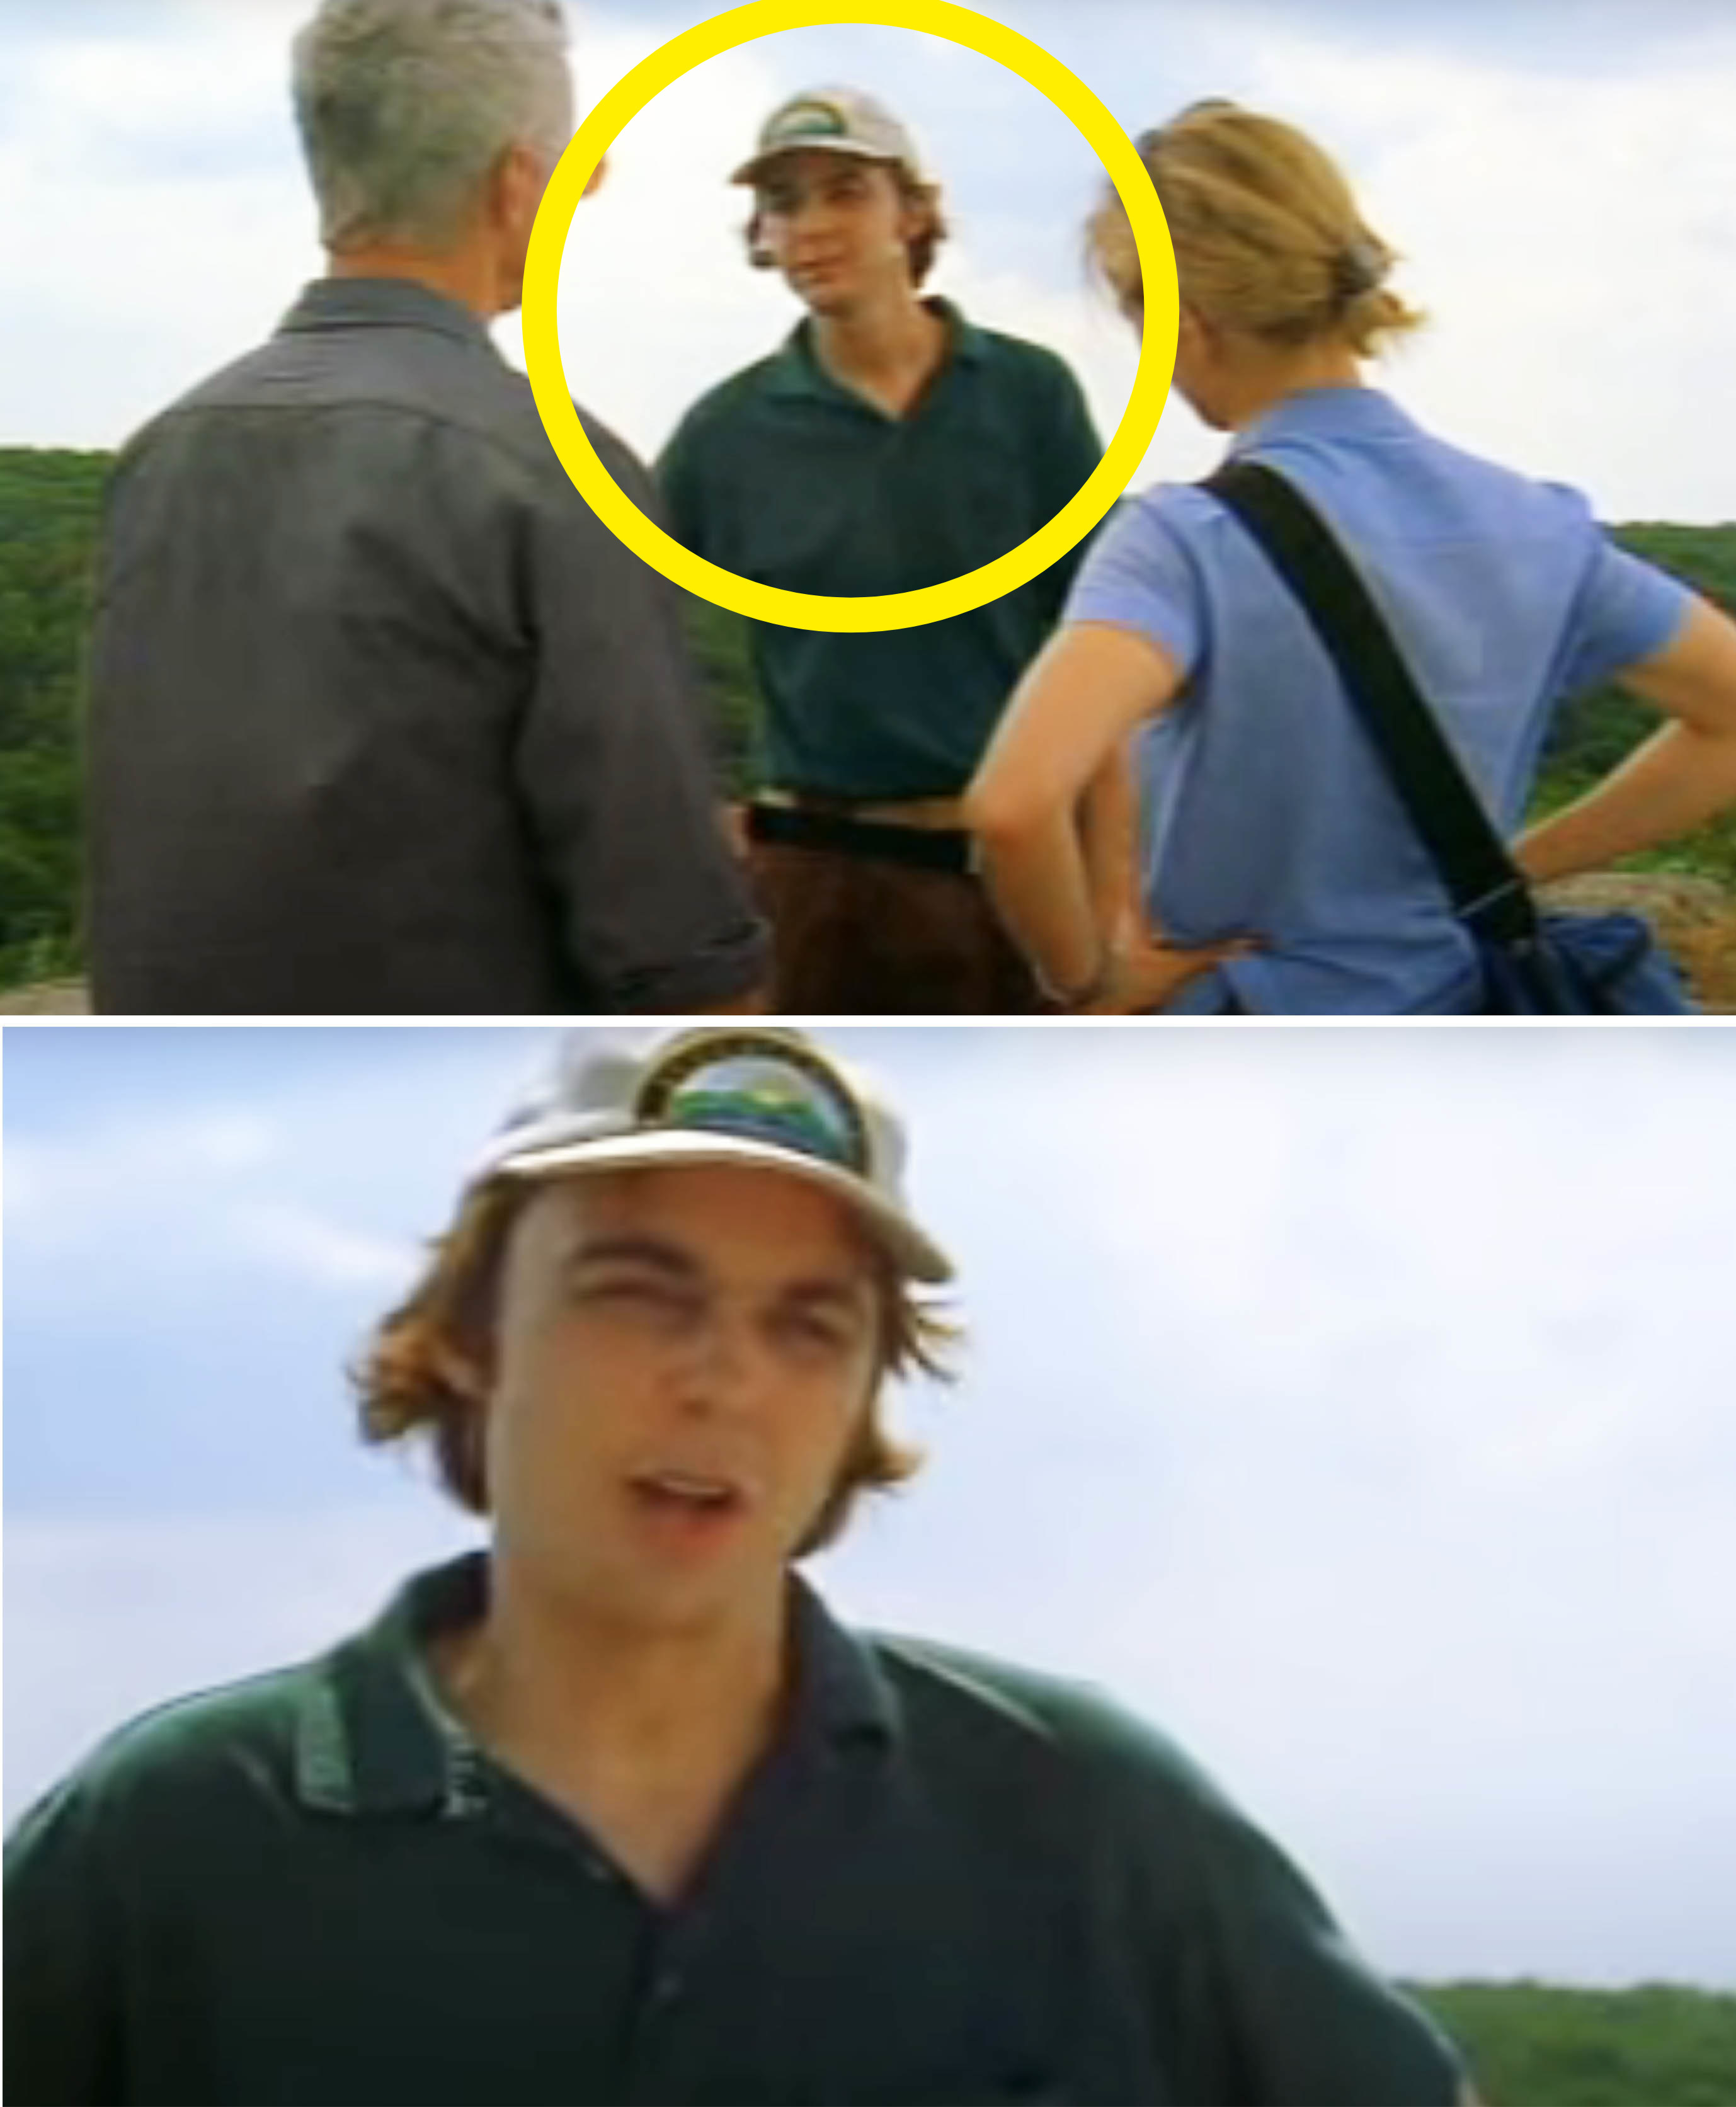 Jim outside and wearing a cap and shirt